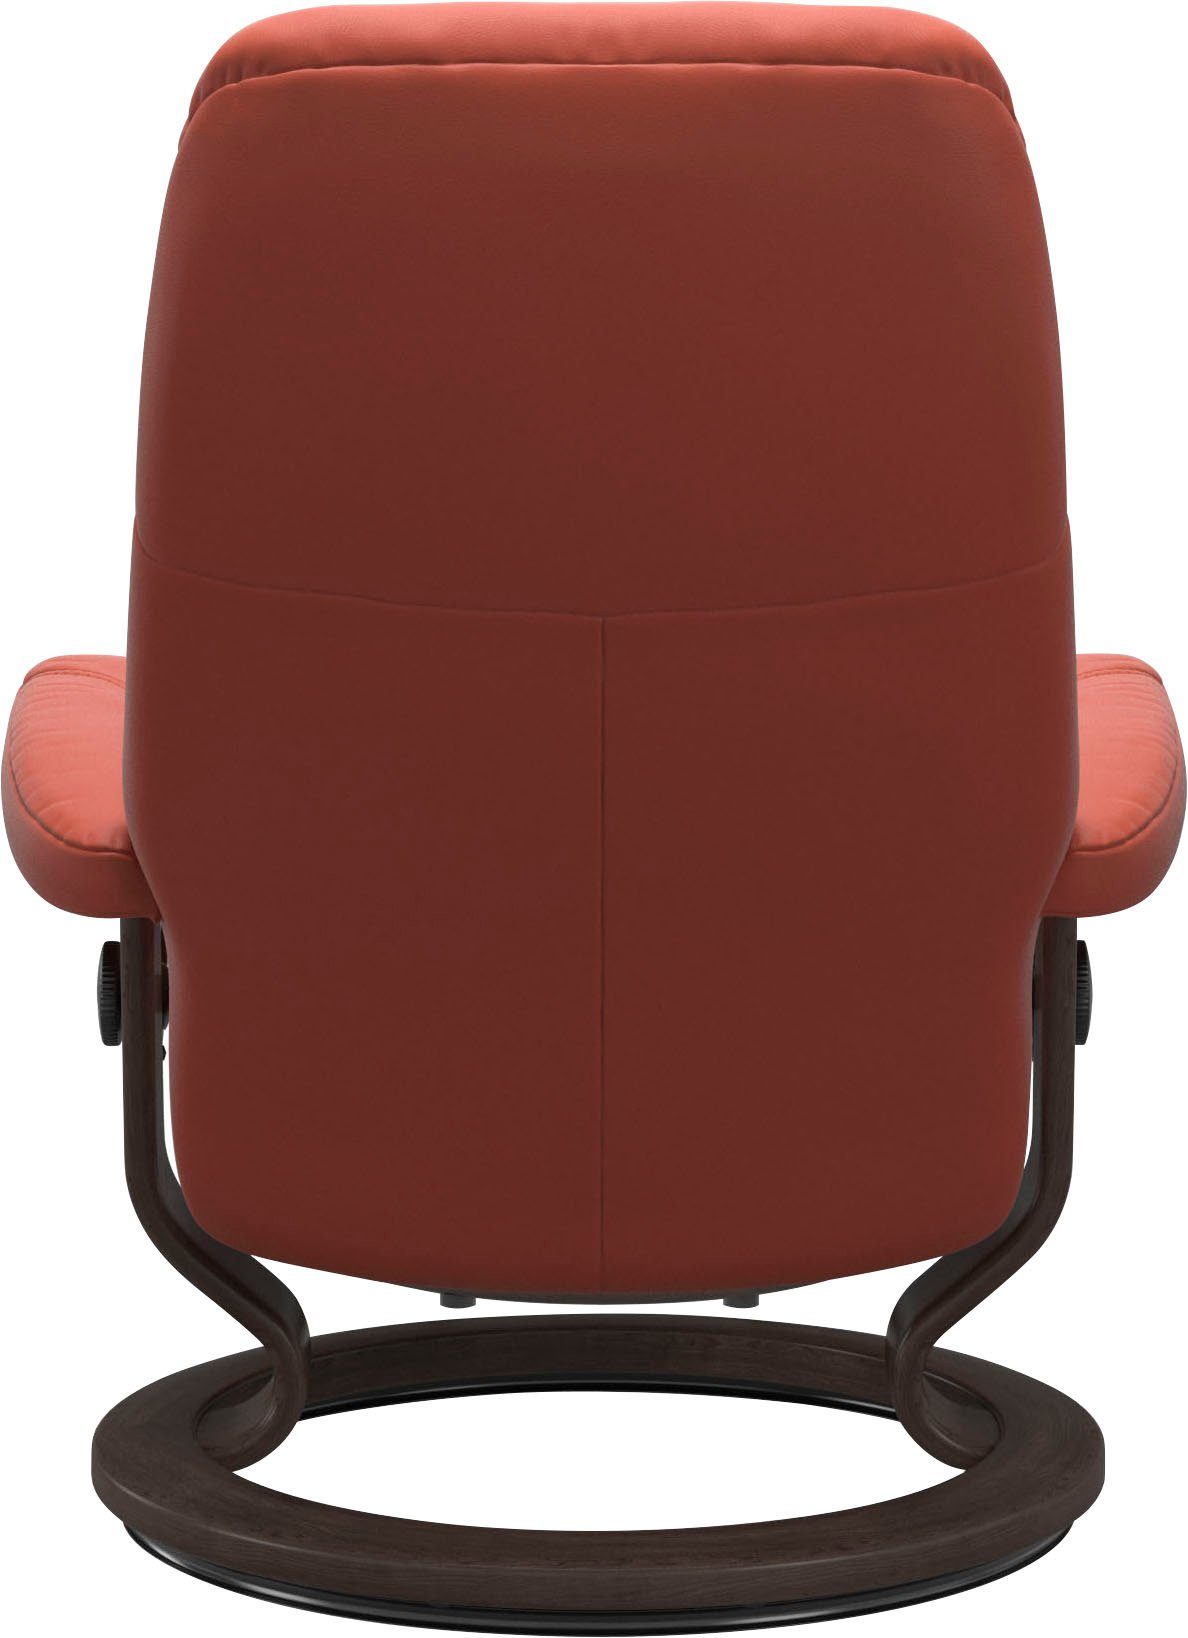 Gestell Wenge Consul, Base, Größe Relaxsessel Classic Stressless® mit S,